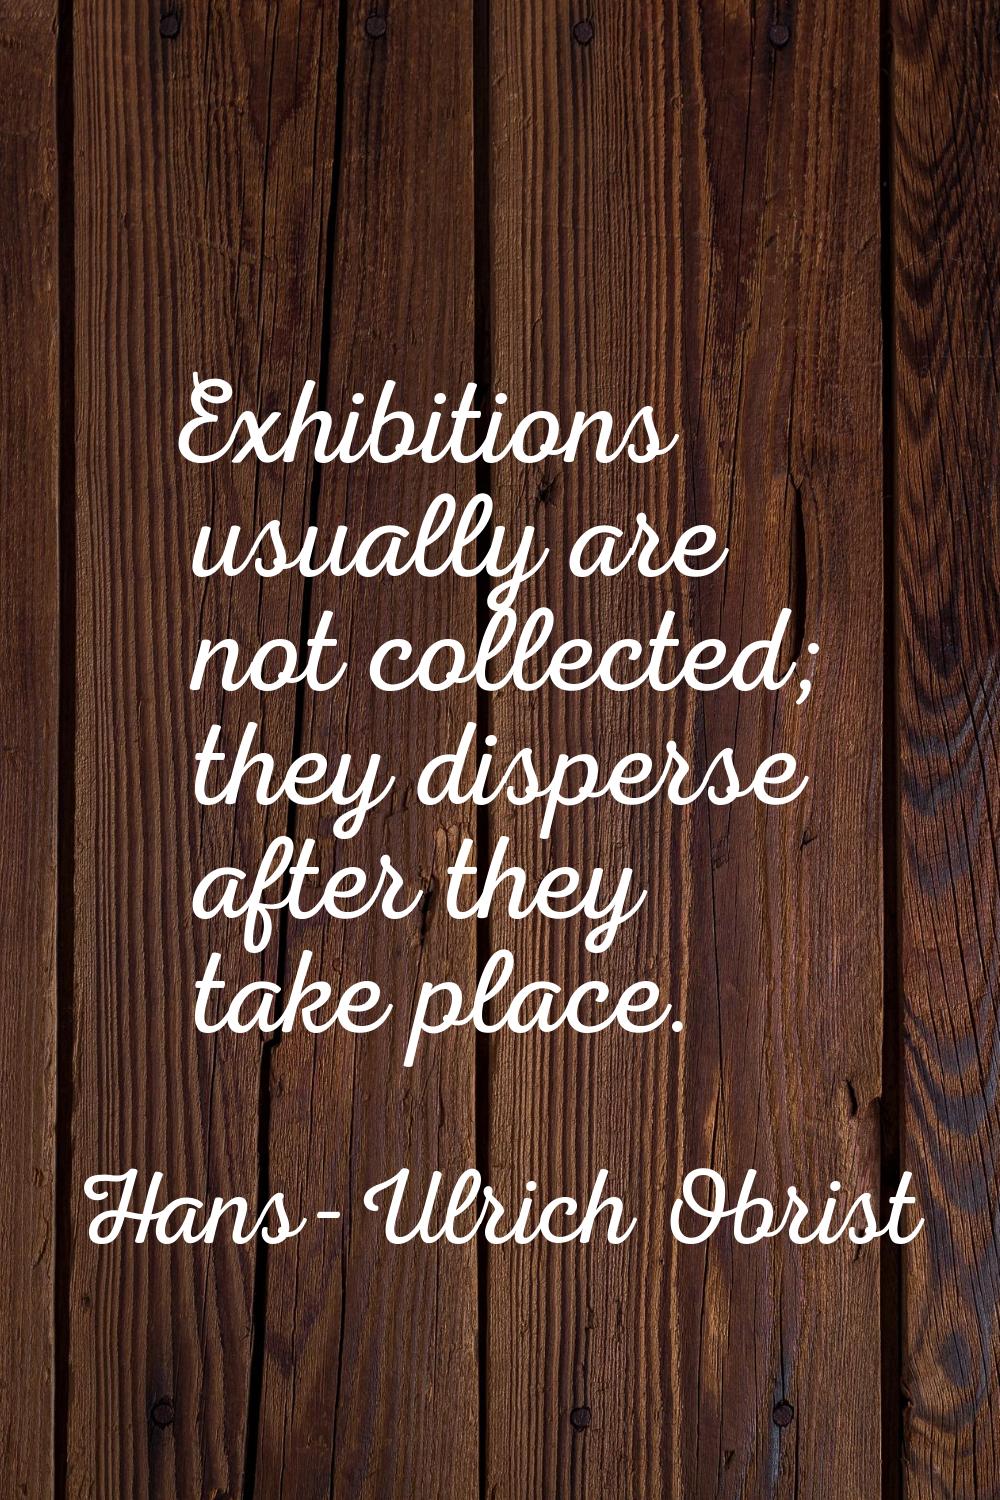 Exhibitions usually are not collected; they disperse after they take place.